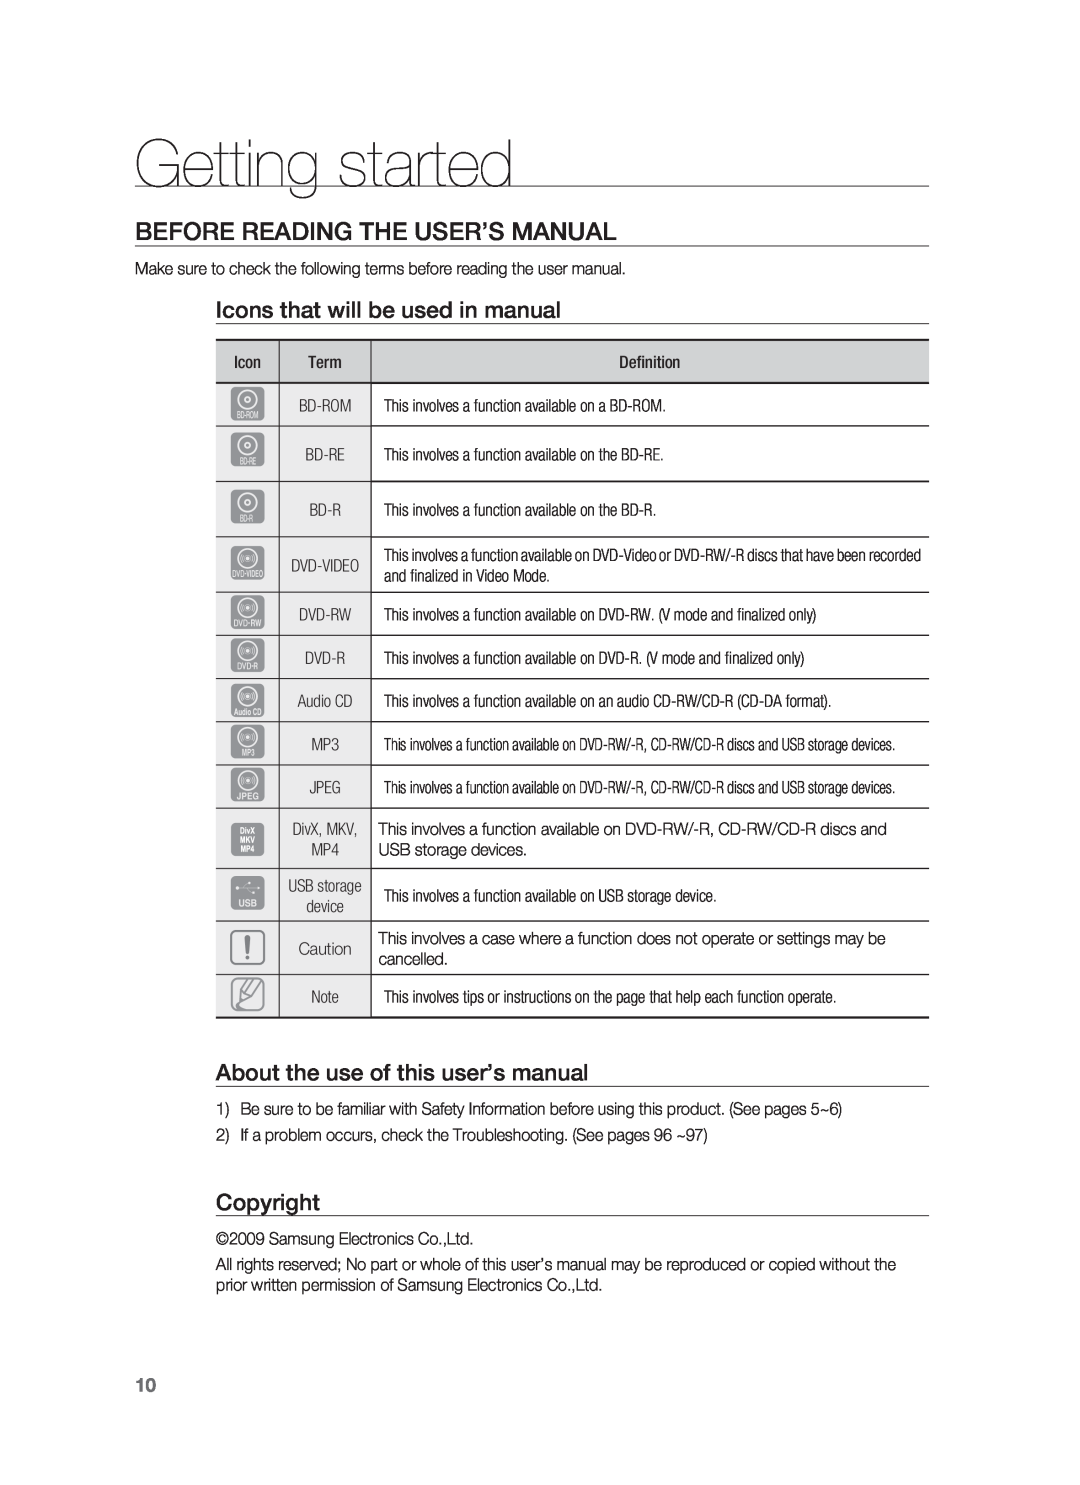 Samsung AH68-02231A Getting started, Before Reading The User’S Manual, Icons that will be used in manual, Copyright 